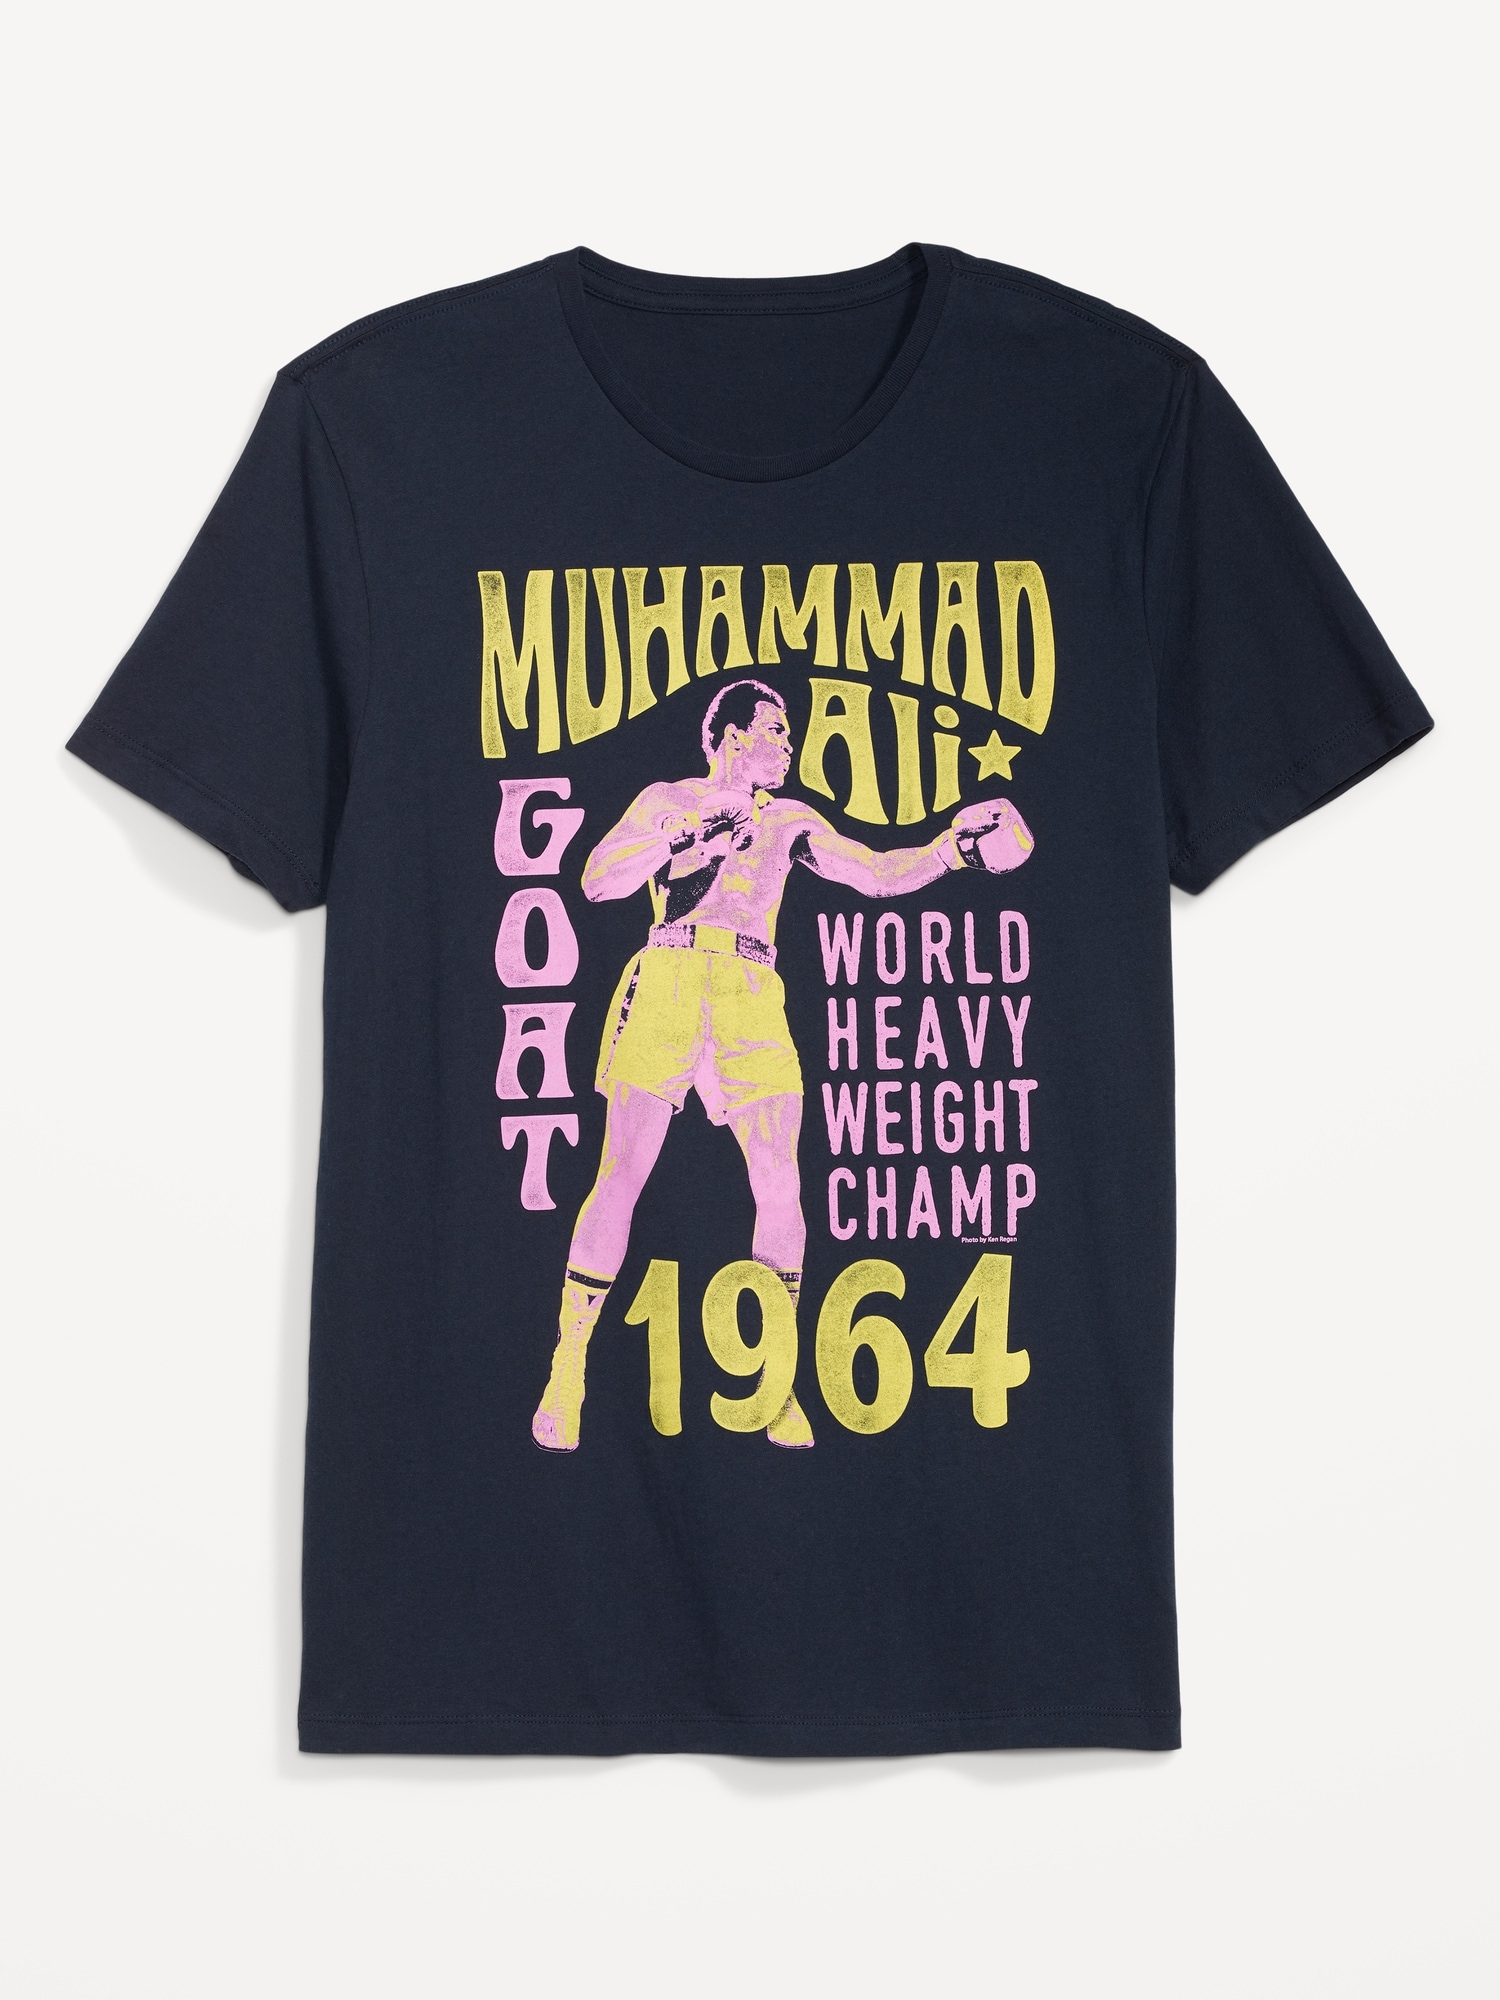 Old Navy "Muhammad Ali"™ Gender-Neutral T-Shirt for Adults blue. 1